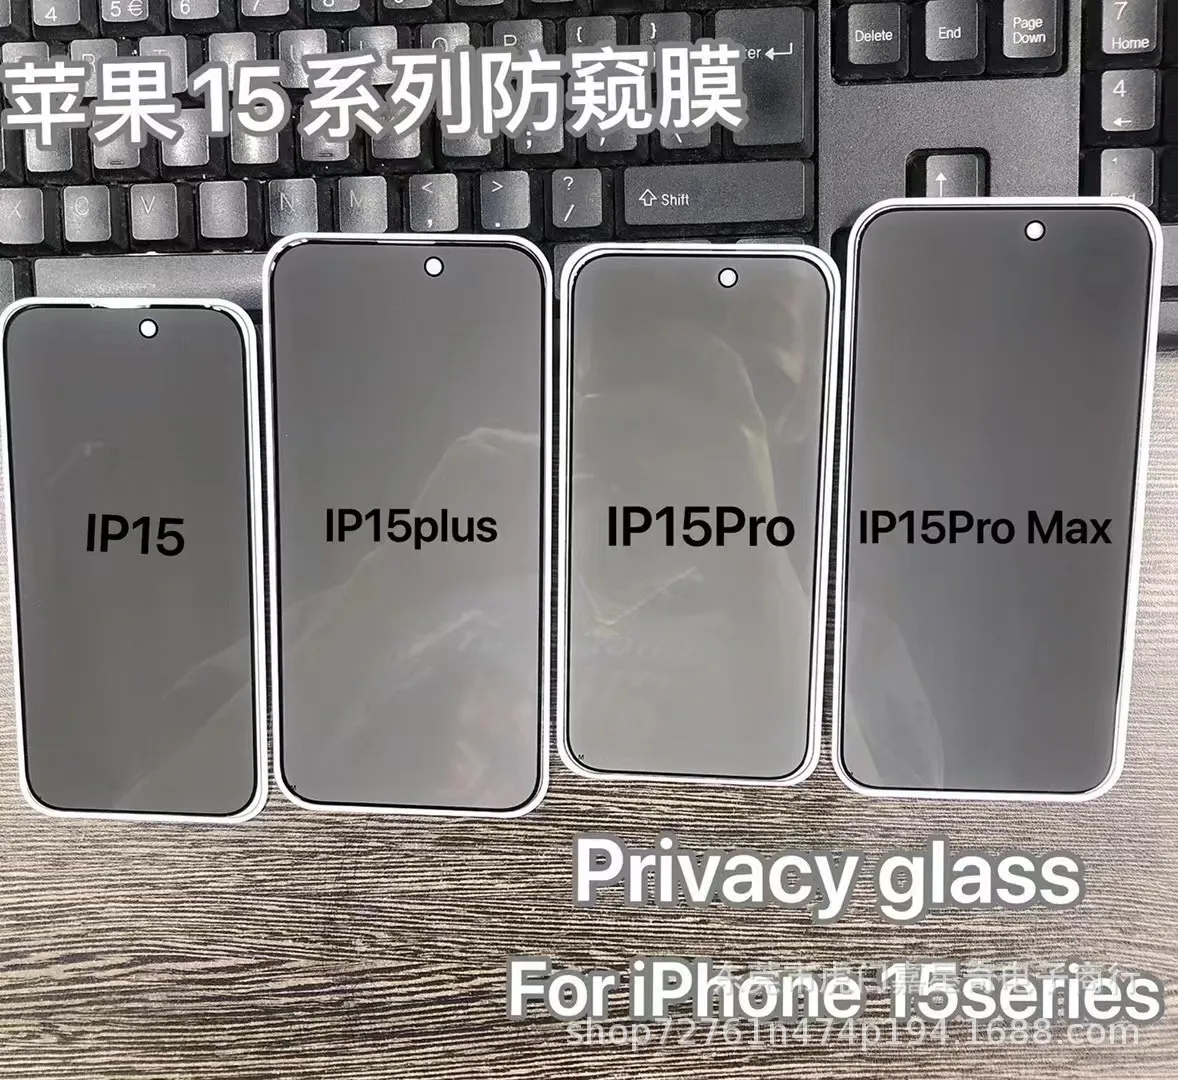 500st Privacy Glass Cover Soft Screen Protector för iPhone 15Pro 15Promax 11 Pro XR XS Max X 8 7 6 Plus Tempered Glass Protective Film för iPhone 15 14 13 12 Mini